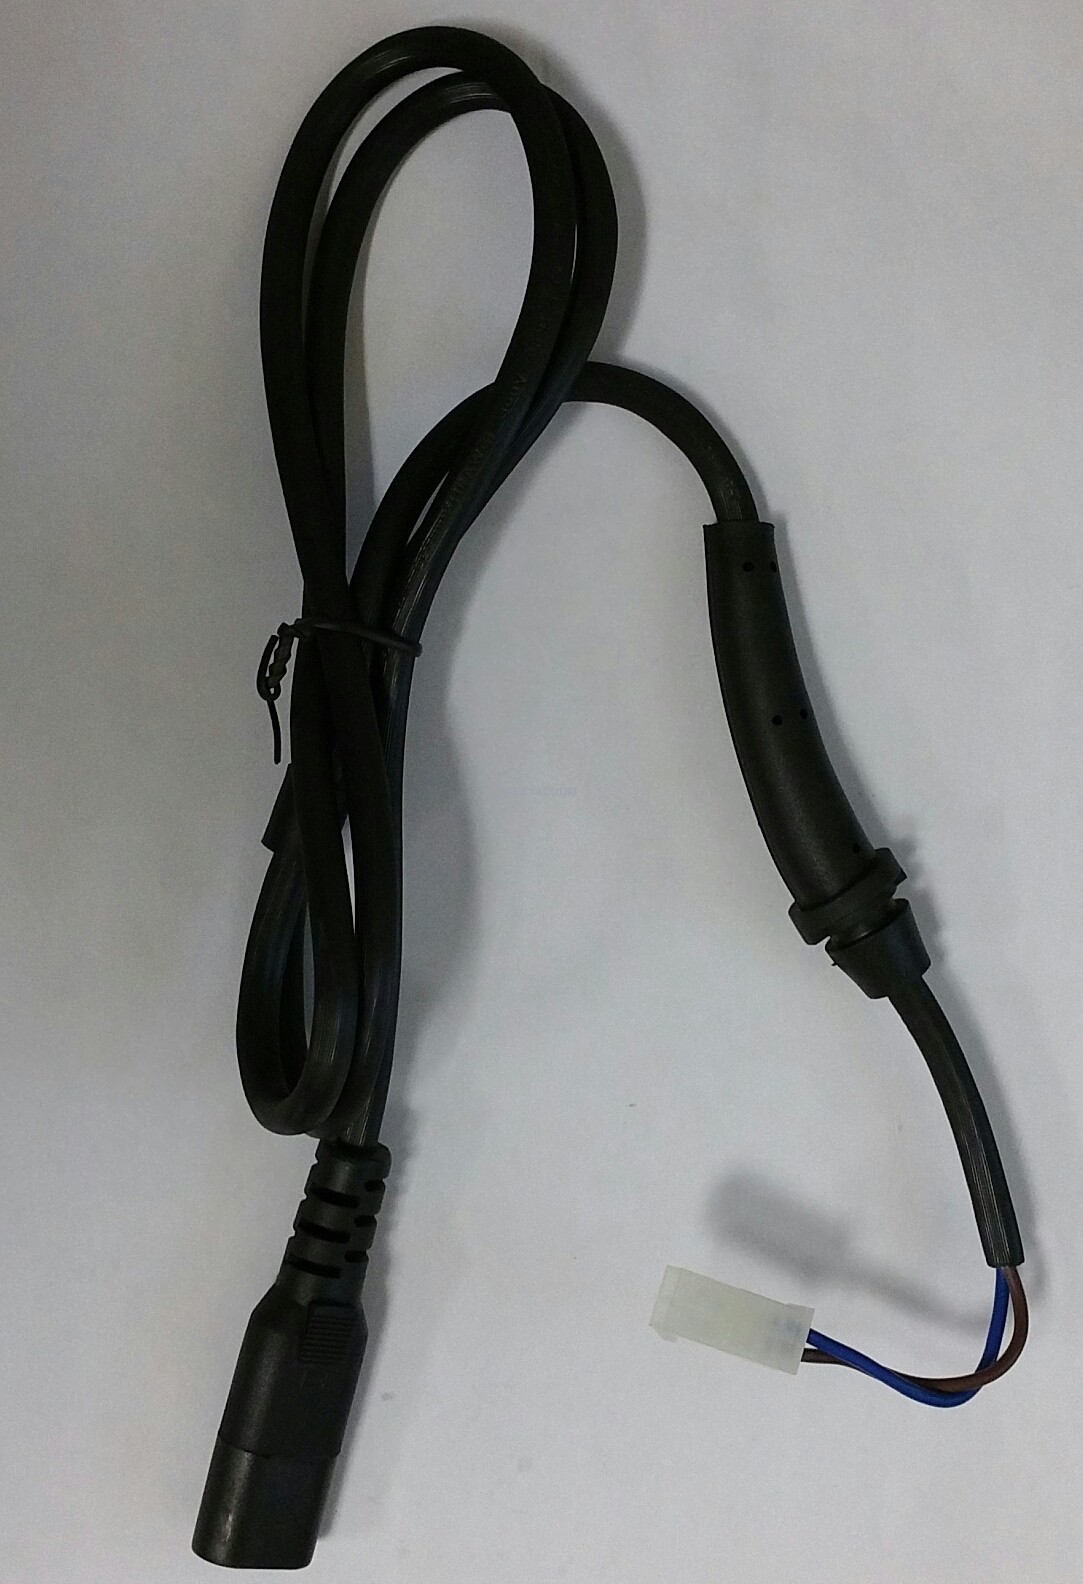 Genuine Vacuum Cleaner Canister Power Supply Cord E E2 Rainbow 